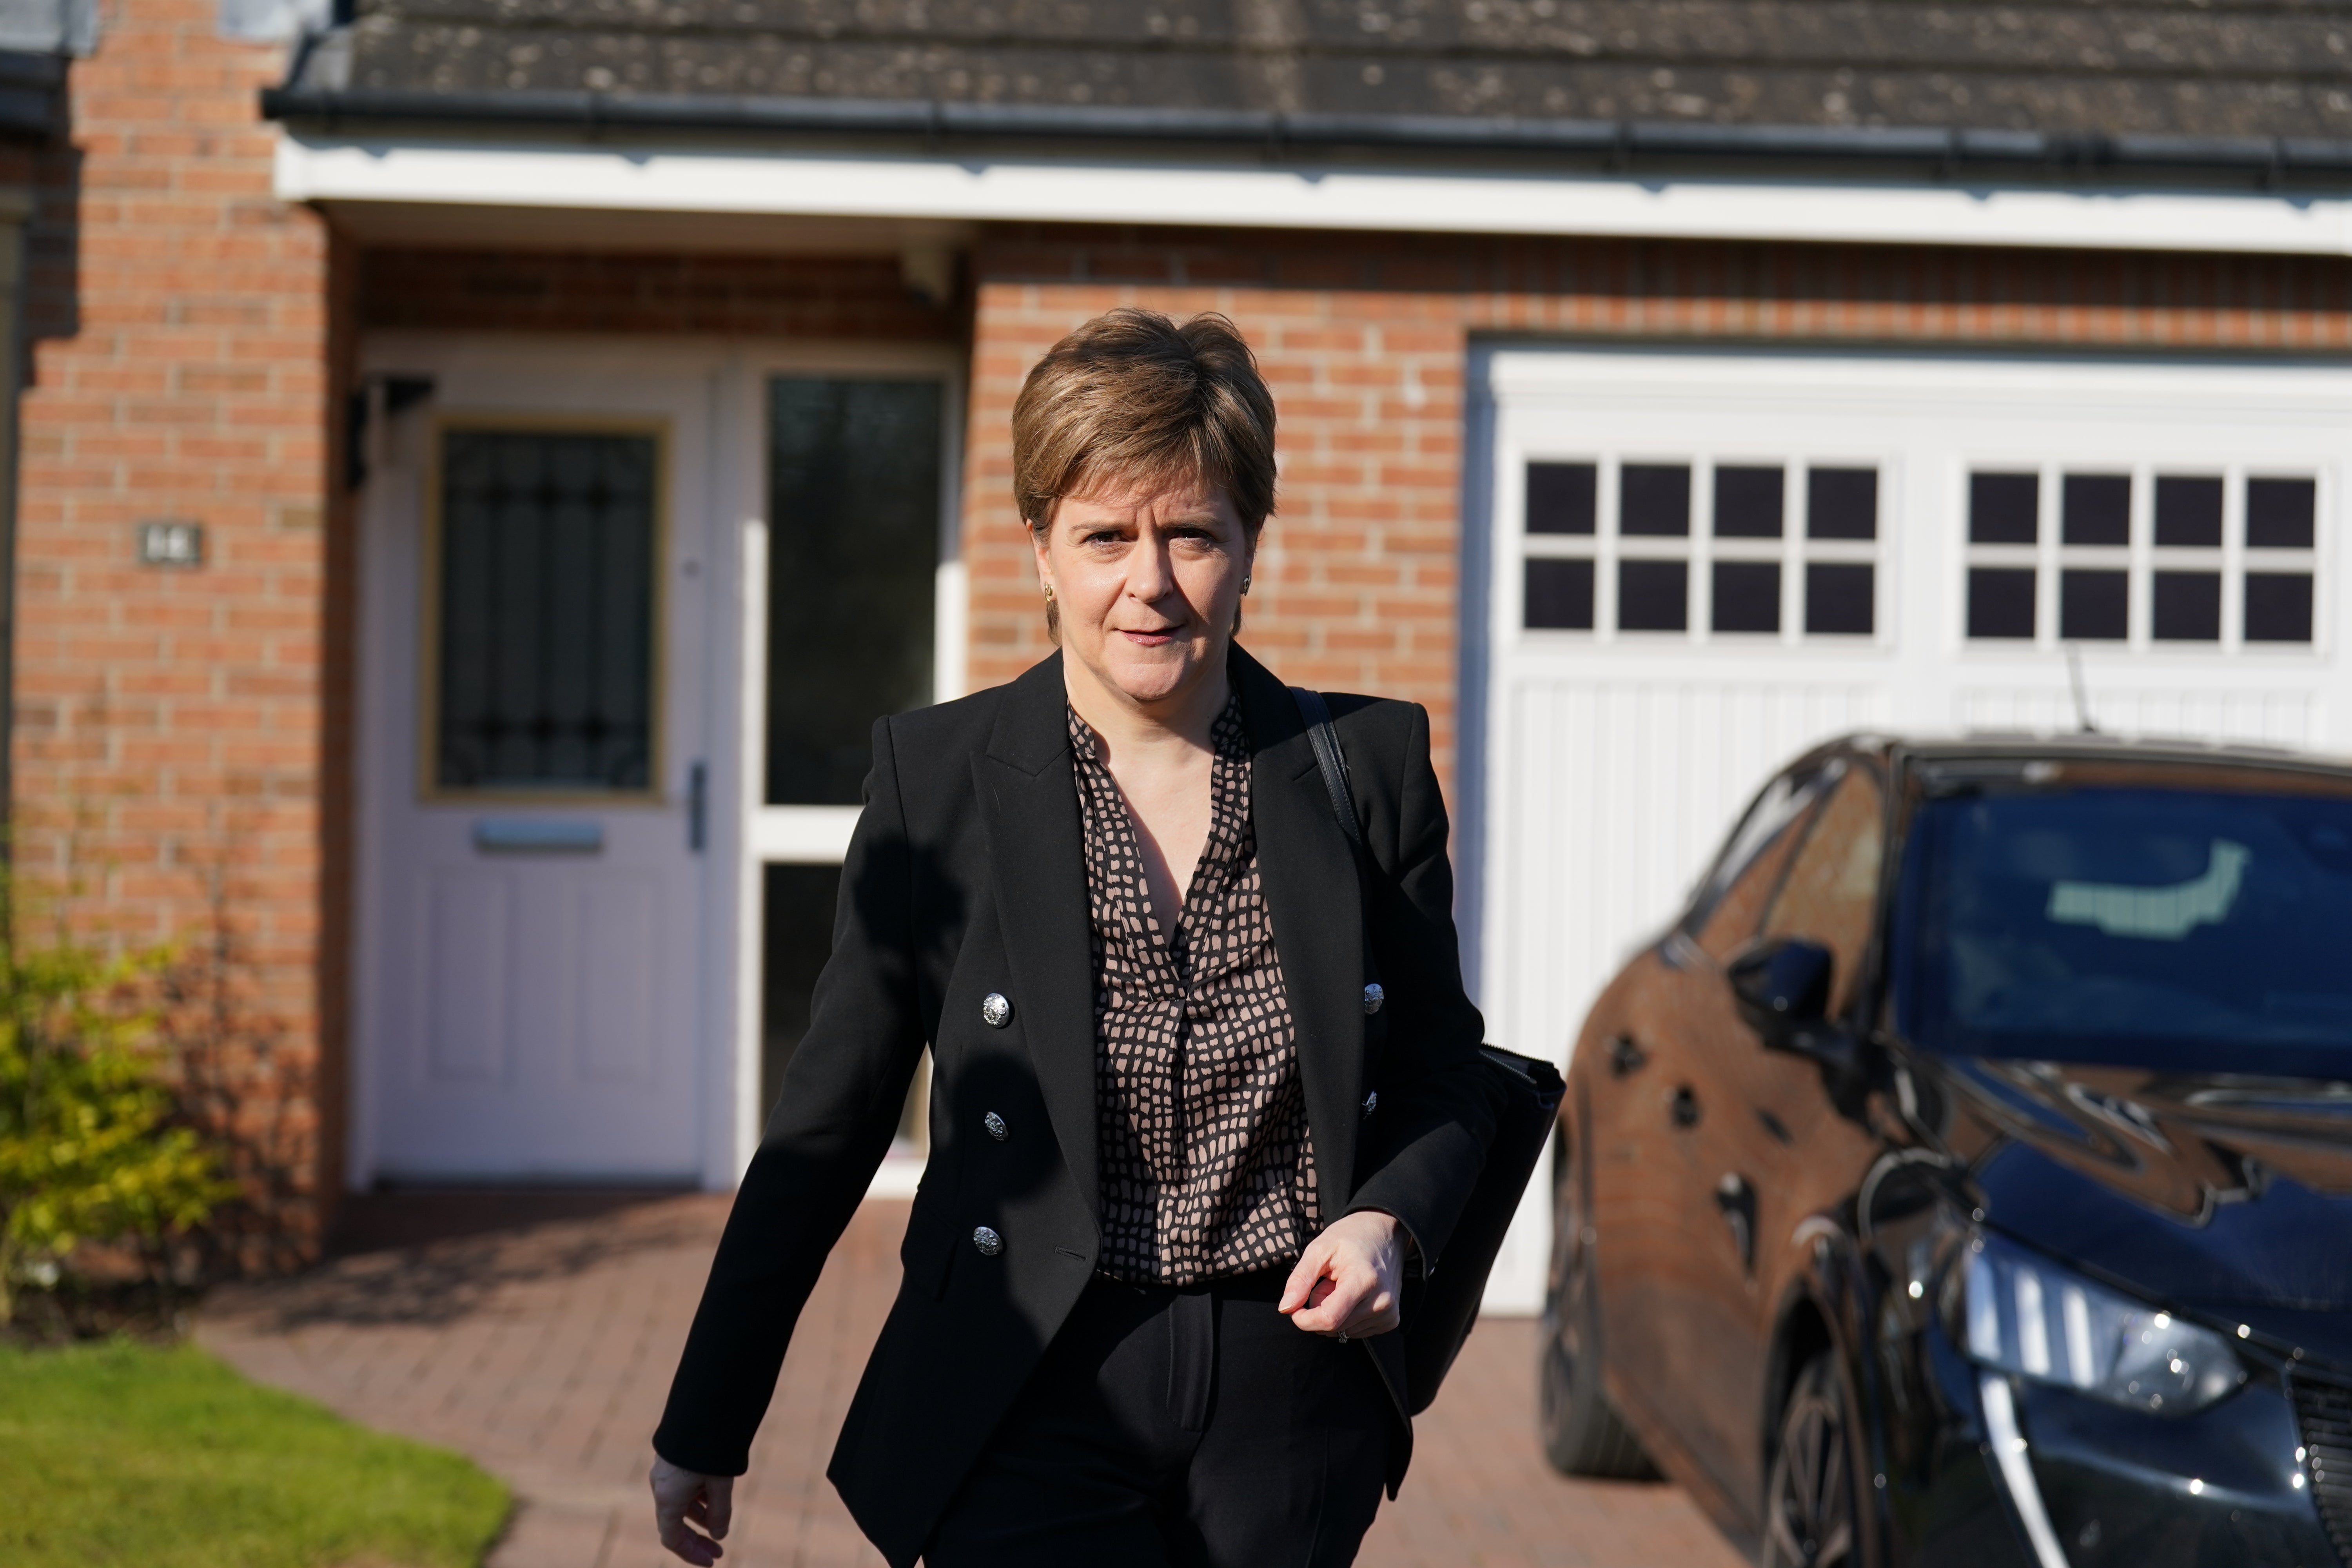 Nicola Sturgeon was arrested as part of the ongoing investigation into the SNP’s finances